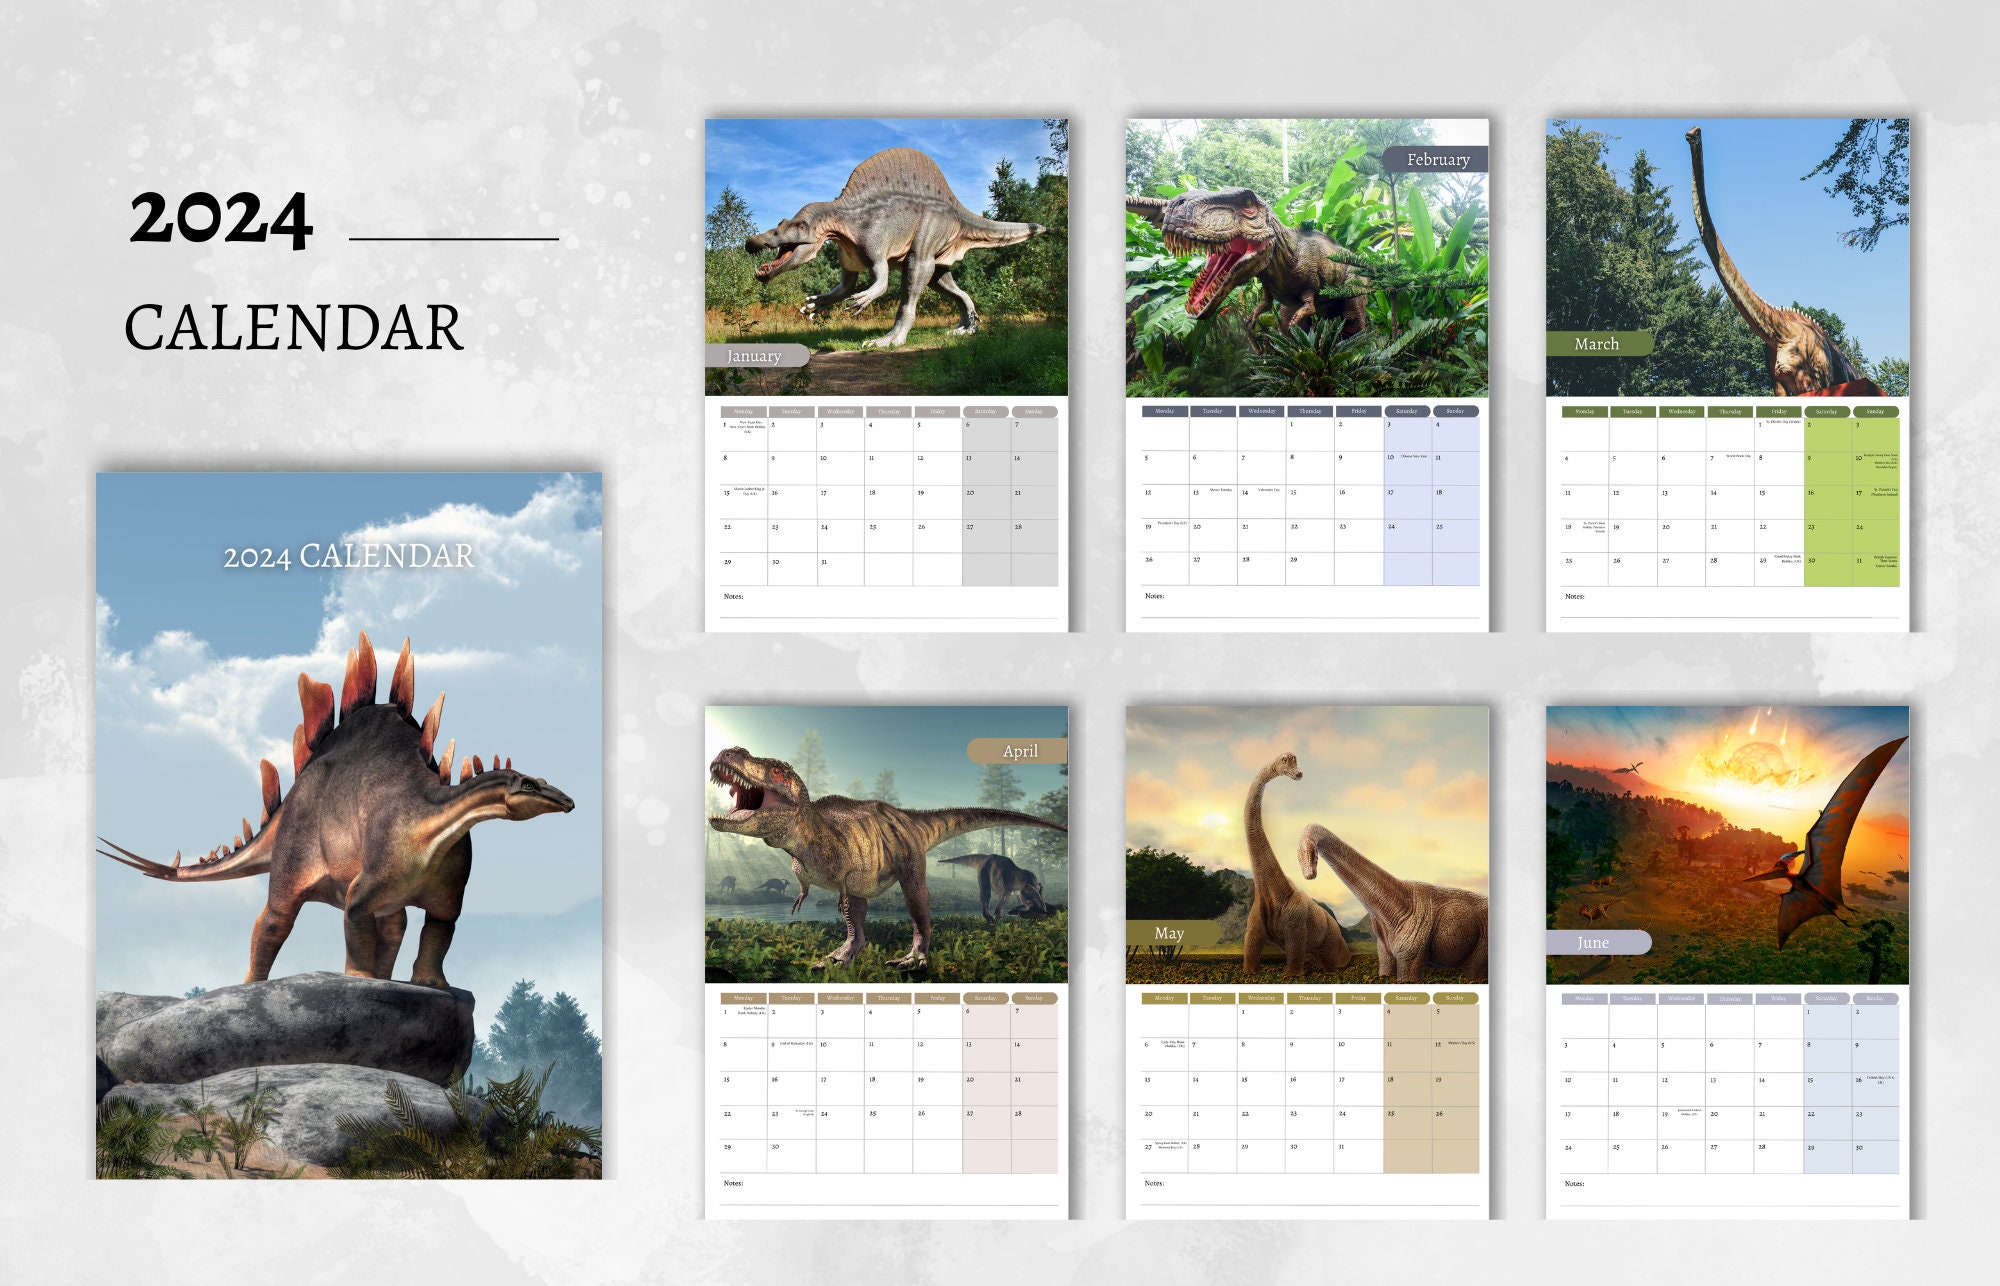 COLLECTOR : GRAND CALENDRIER MURAL DINOSAURES 2024